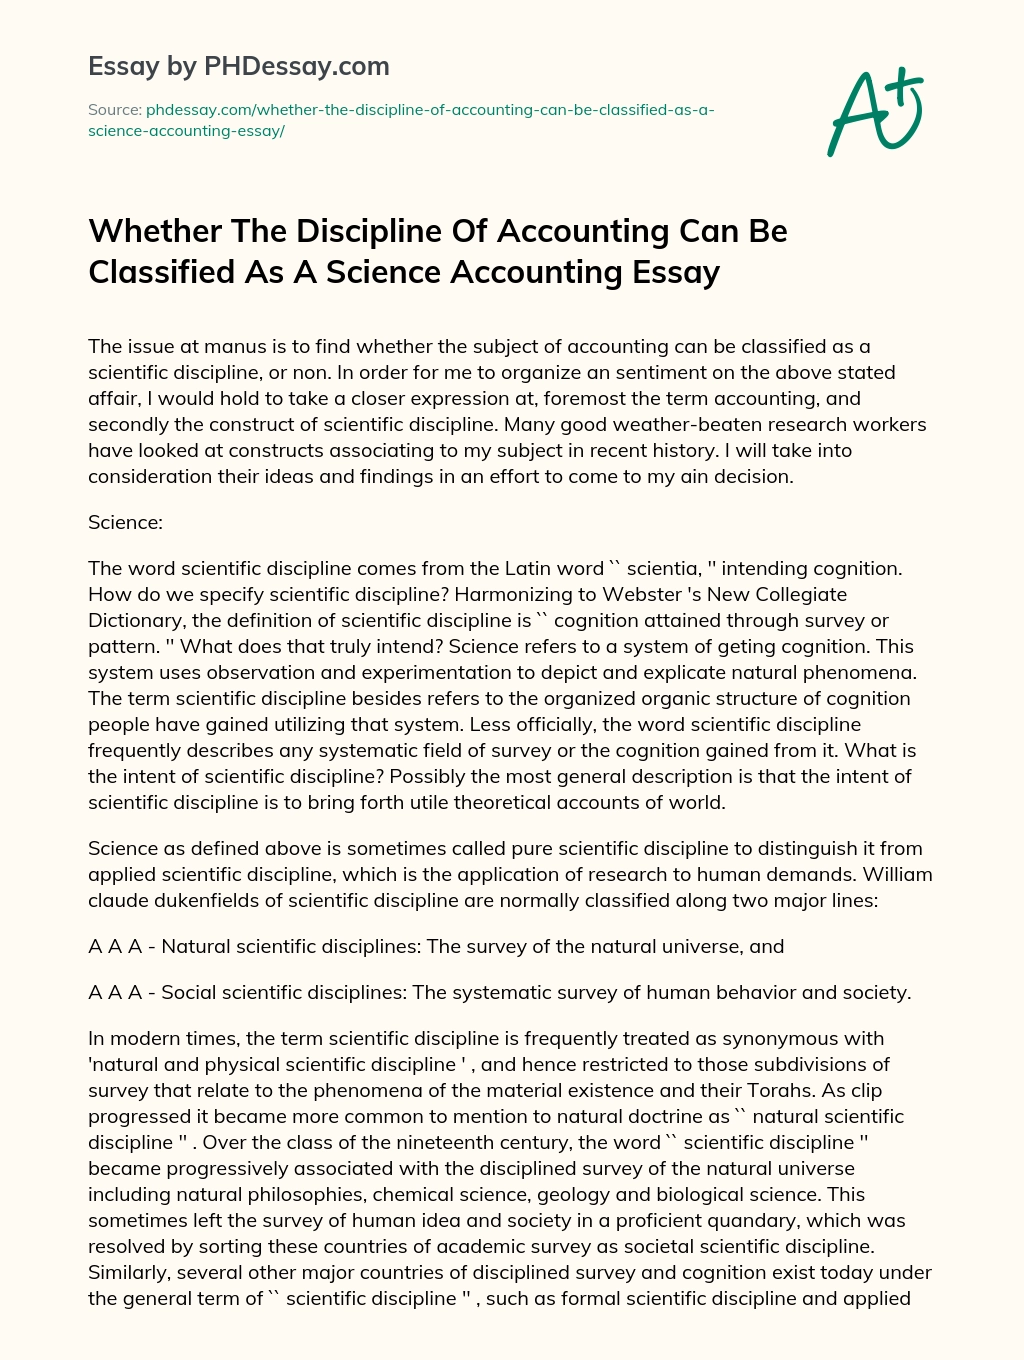 Whether The Discipline Of Accounting Can Be Classified As A Science Accounting Essay essay